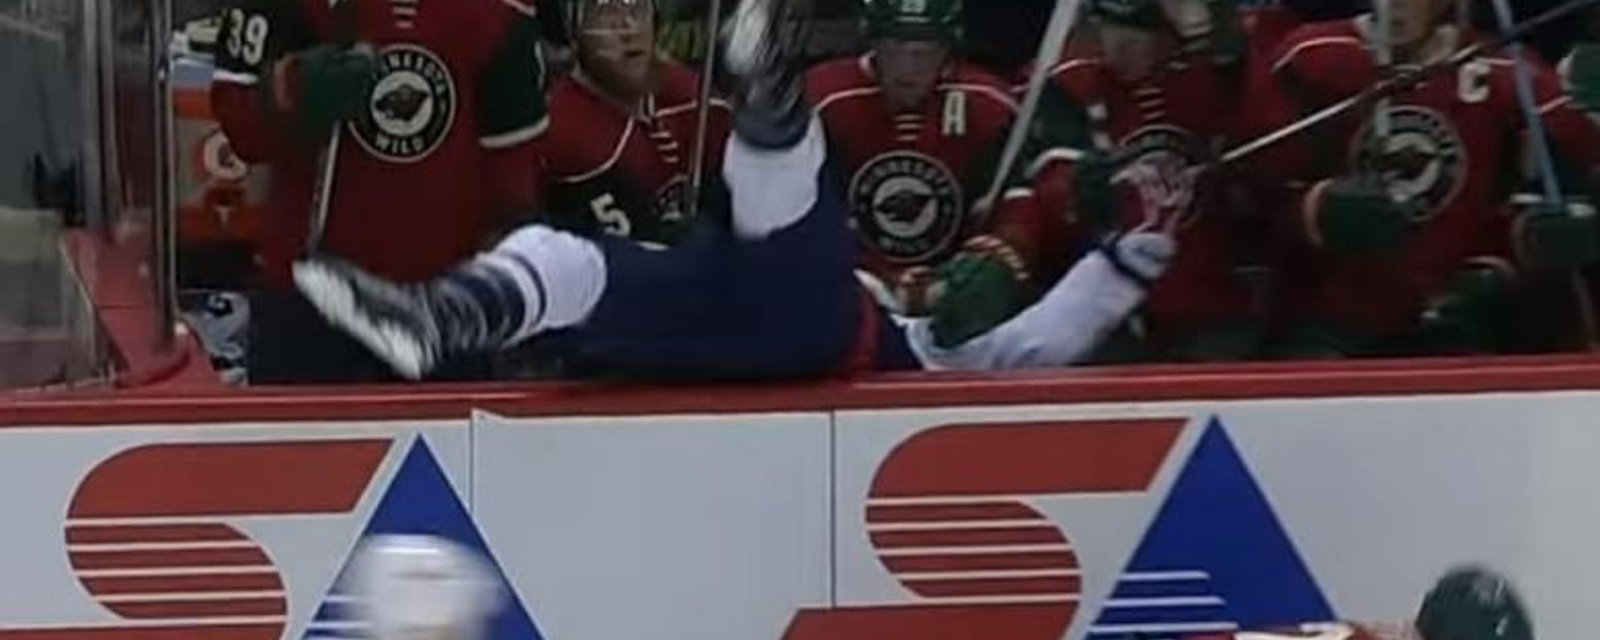 Nino Niederreiter sends Wilson into the Wild bench with a huge hit.